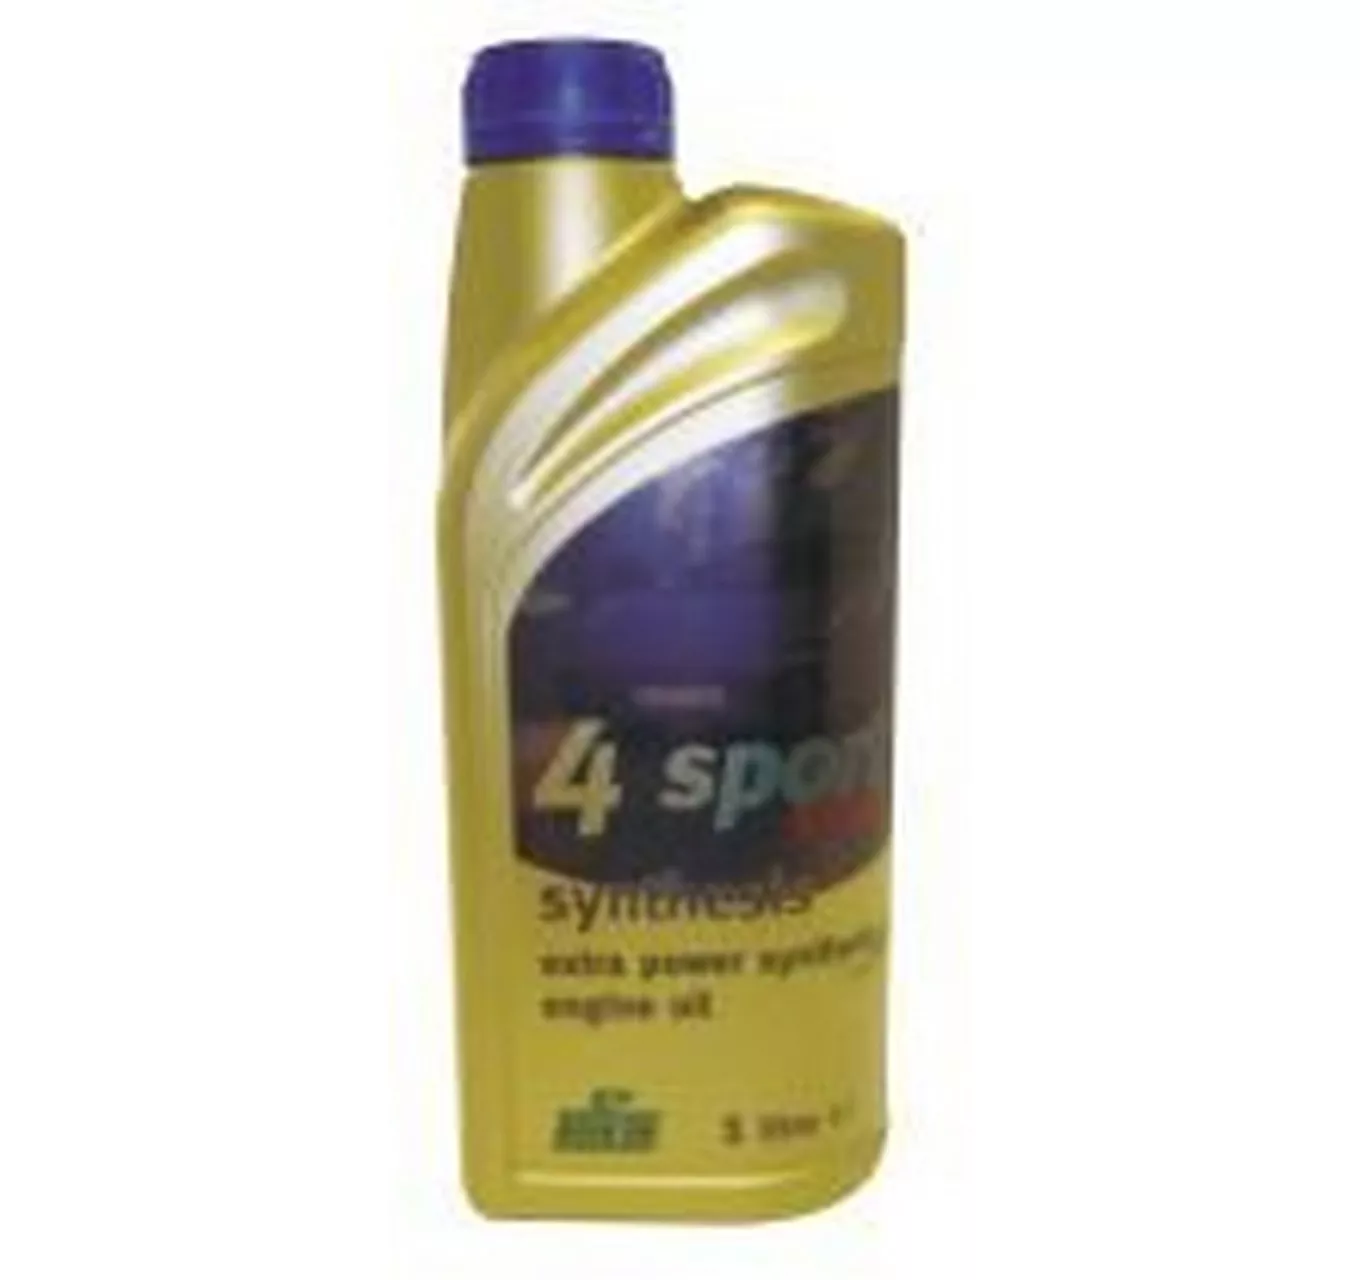 Synthesis 4 Sport 5W30 5Ltr